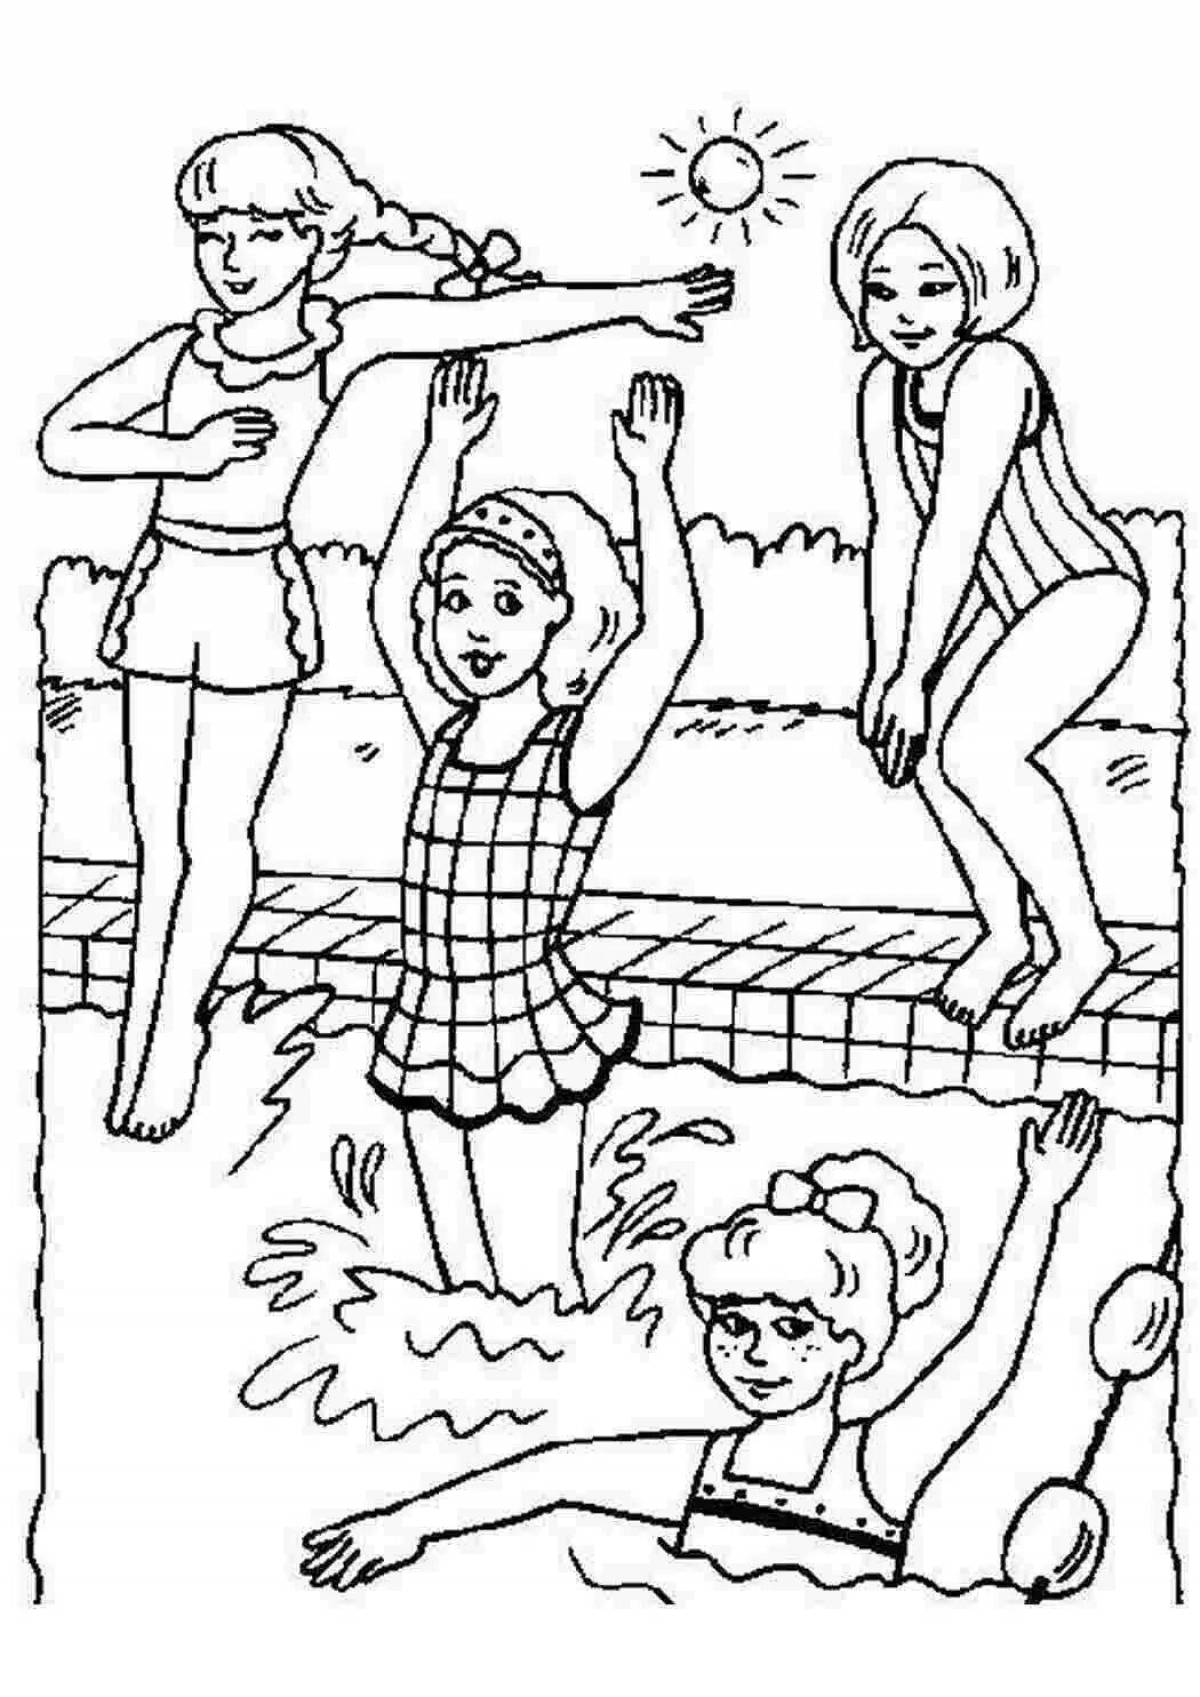 Coloring page with swimming pool for kids